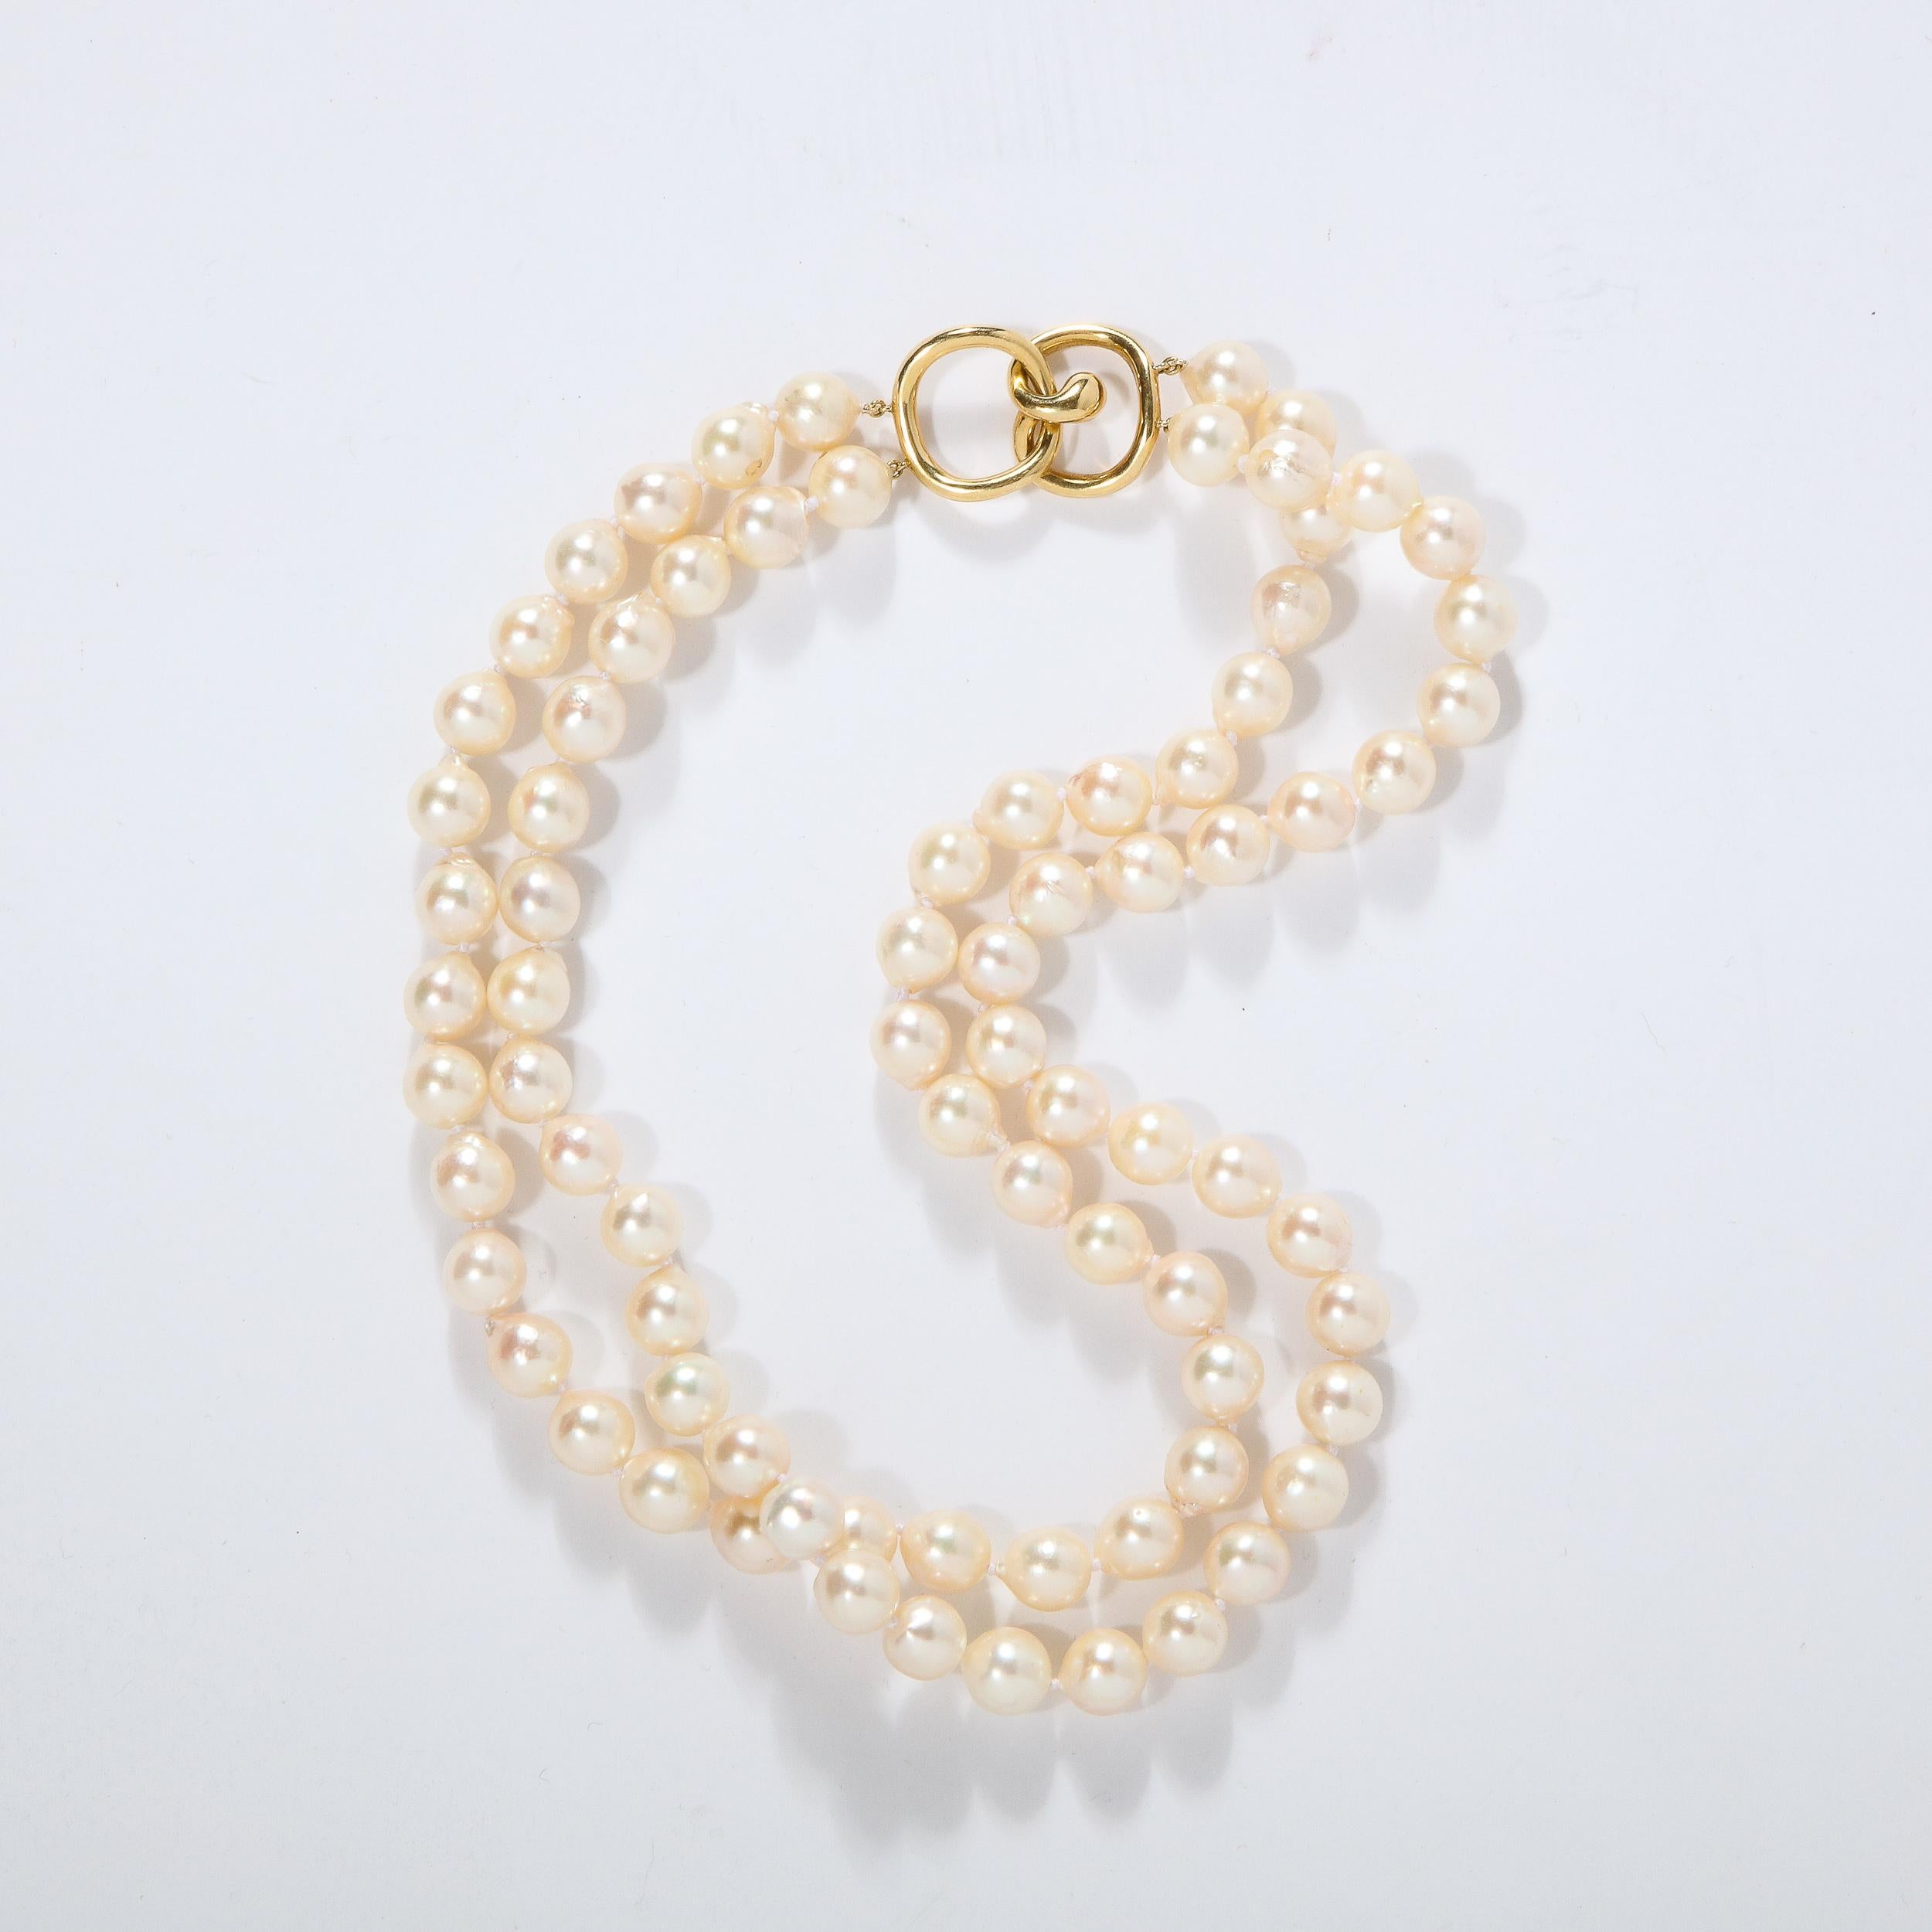 Bead Angela Cummings for Tiffanys Pearl & 18k Gold Necklace